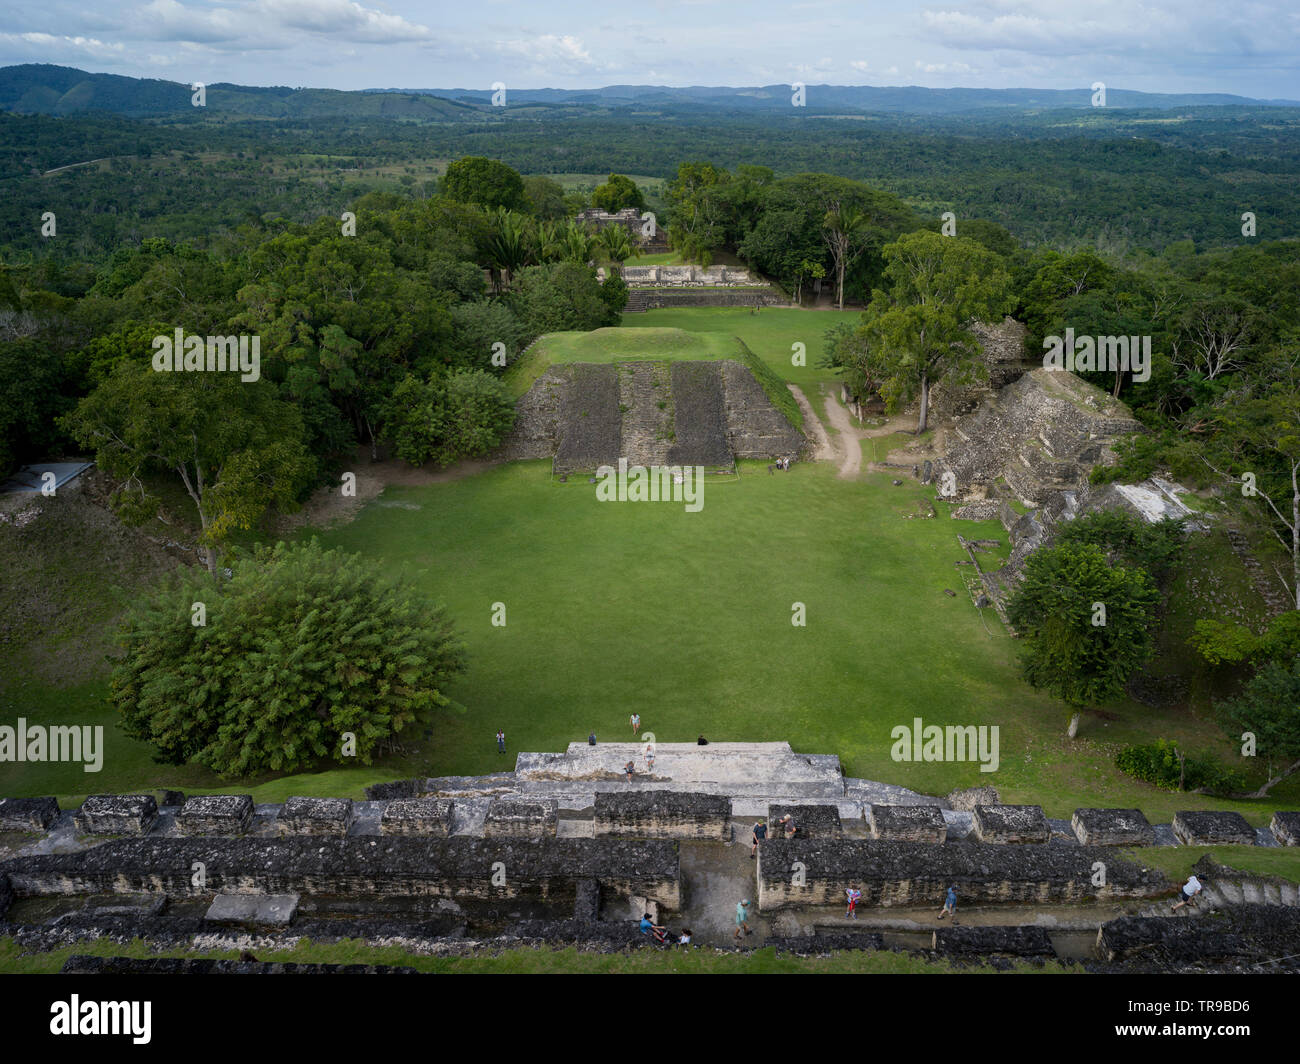 Elevated view of Ancient Mayan Archaeological Site, San Jose Succotz, Cayo District, Belize Stock Photo